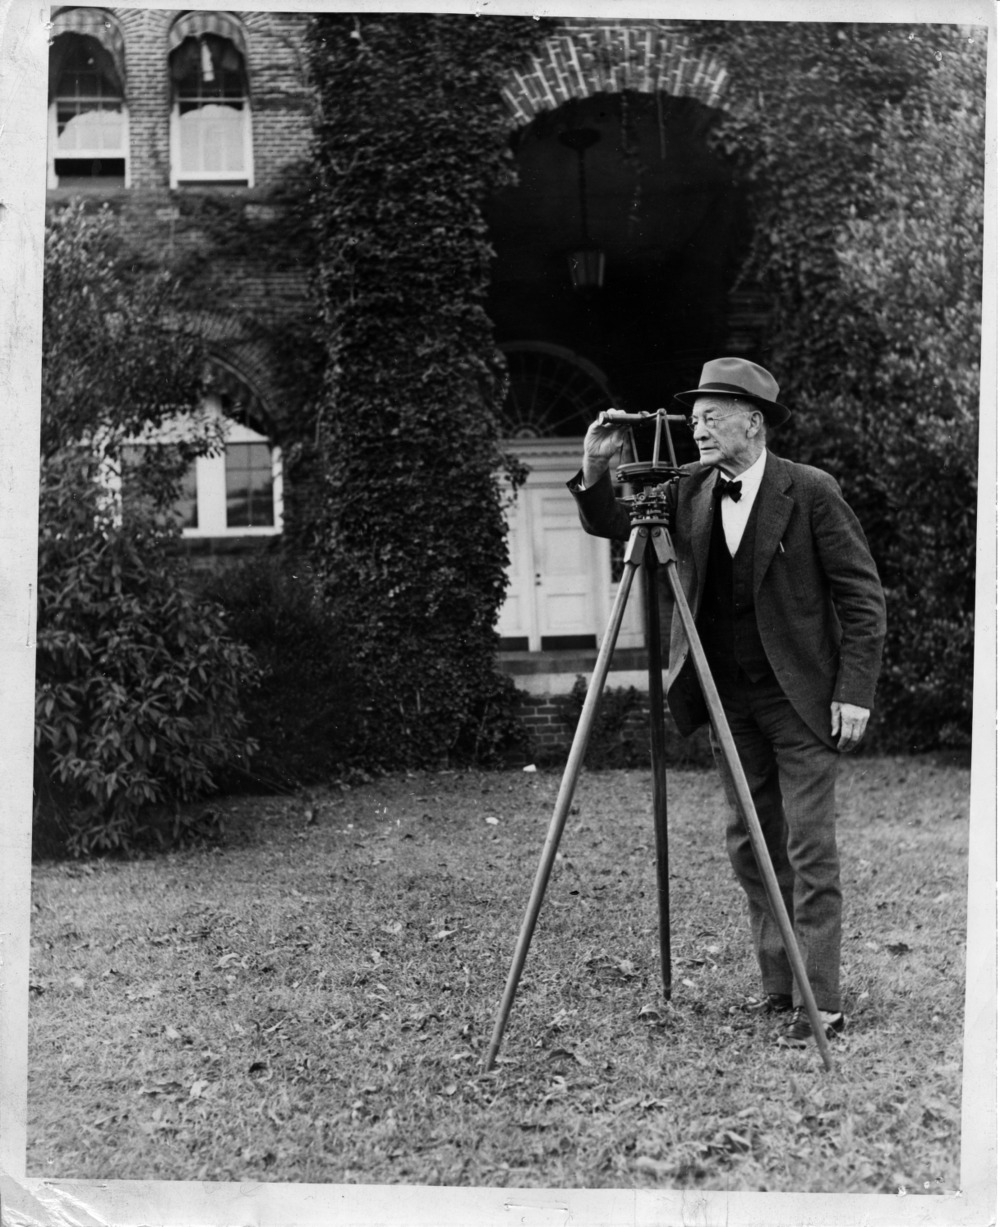 Black and white photograph titled "W. C. Riddick with surveying instrument he had used in the late 1830s to survey the right-of-way for the Raleigh and Gaston Railroad".